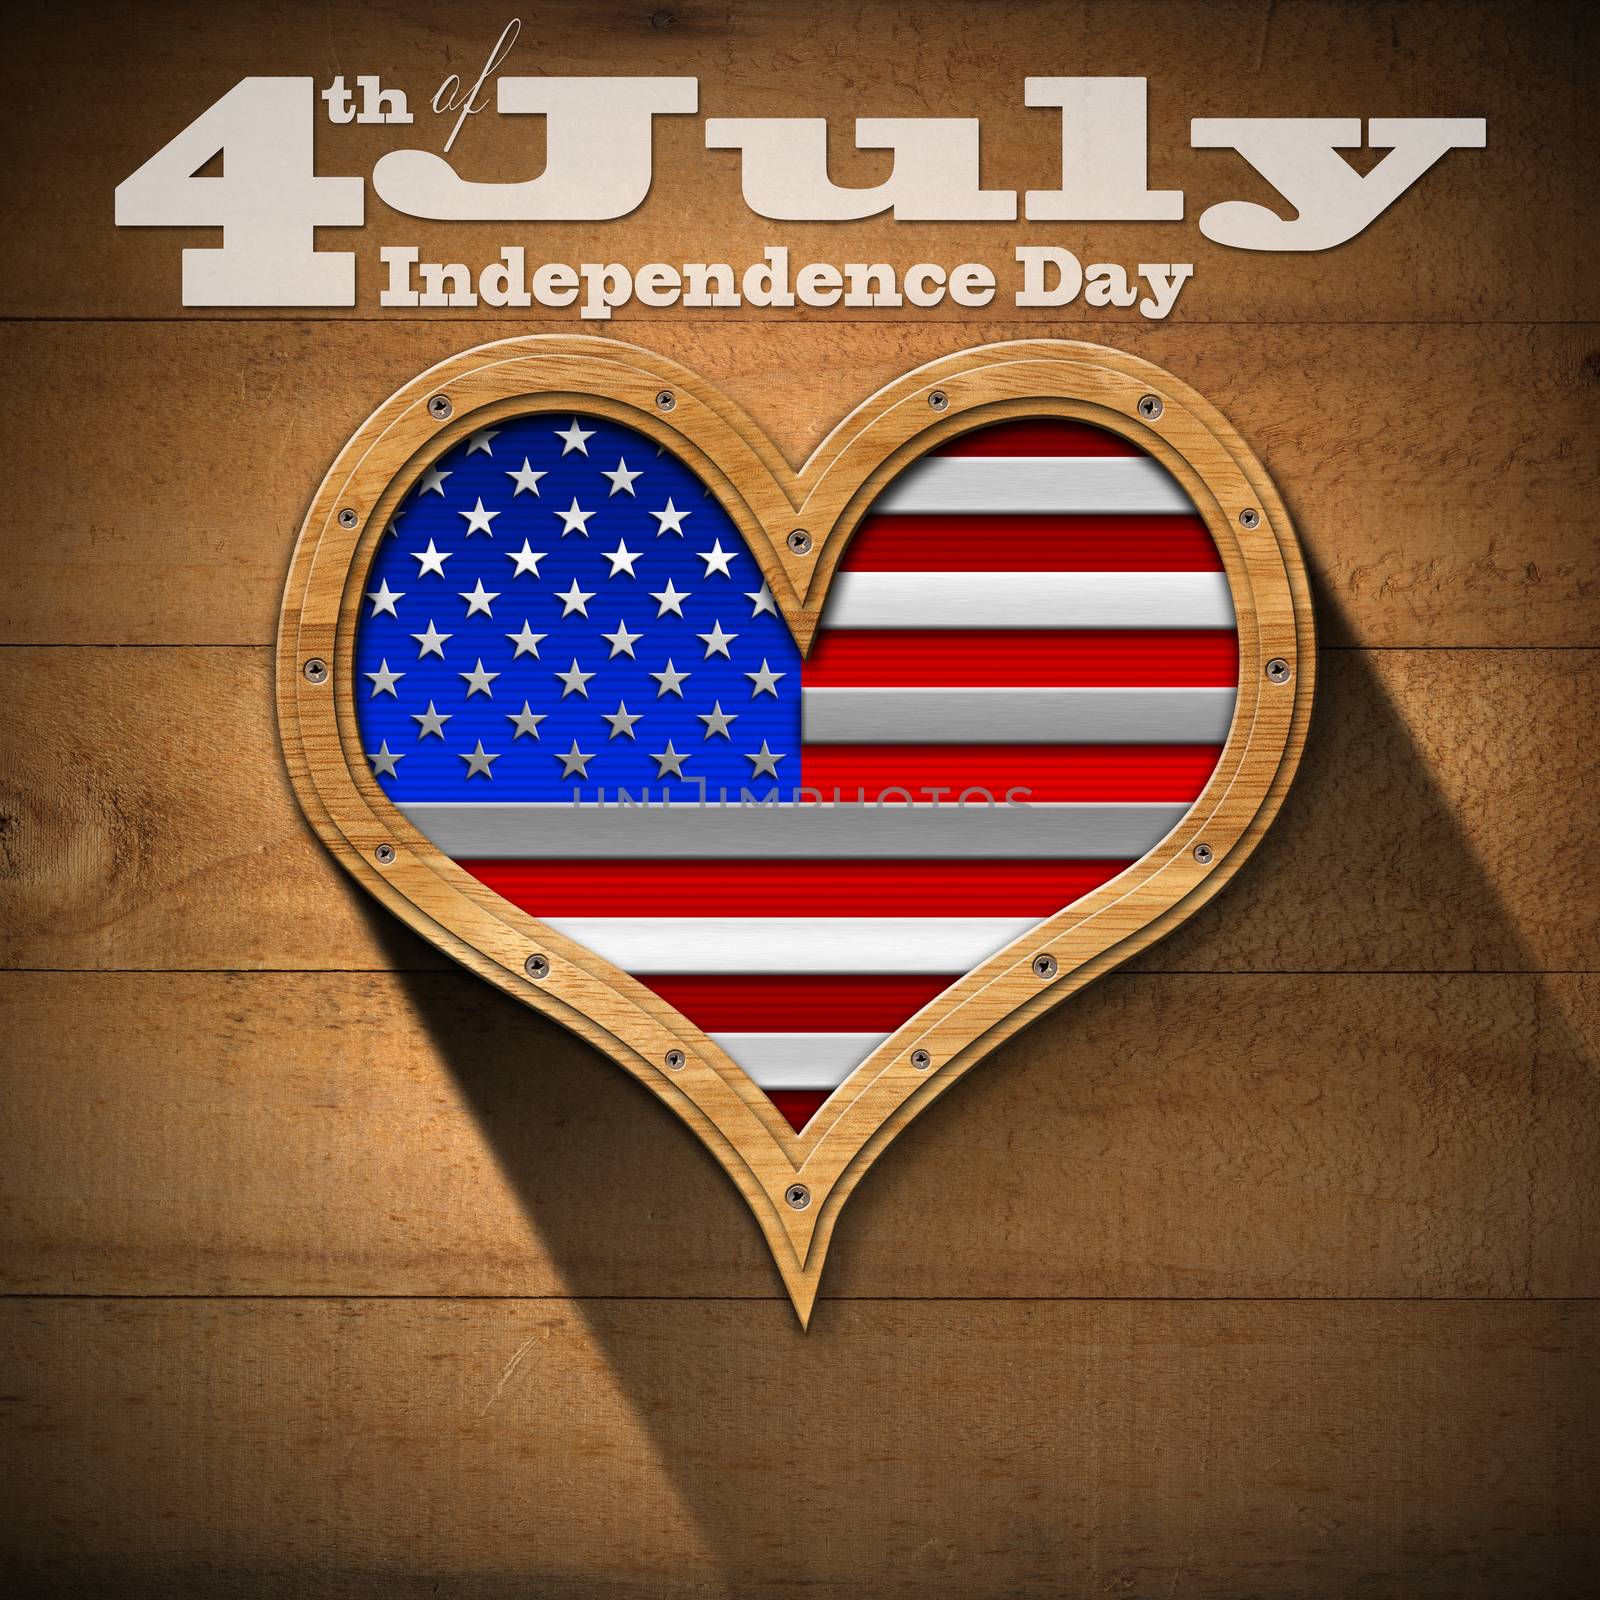 Wooden porthole heart shape with US flag interior, on wooden wall with phrase "4th of July - Independence Day"